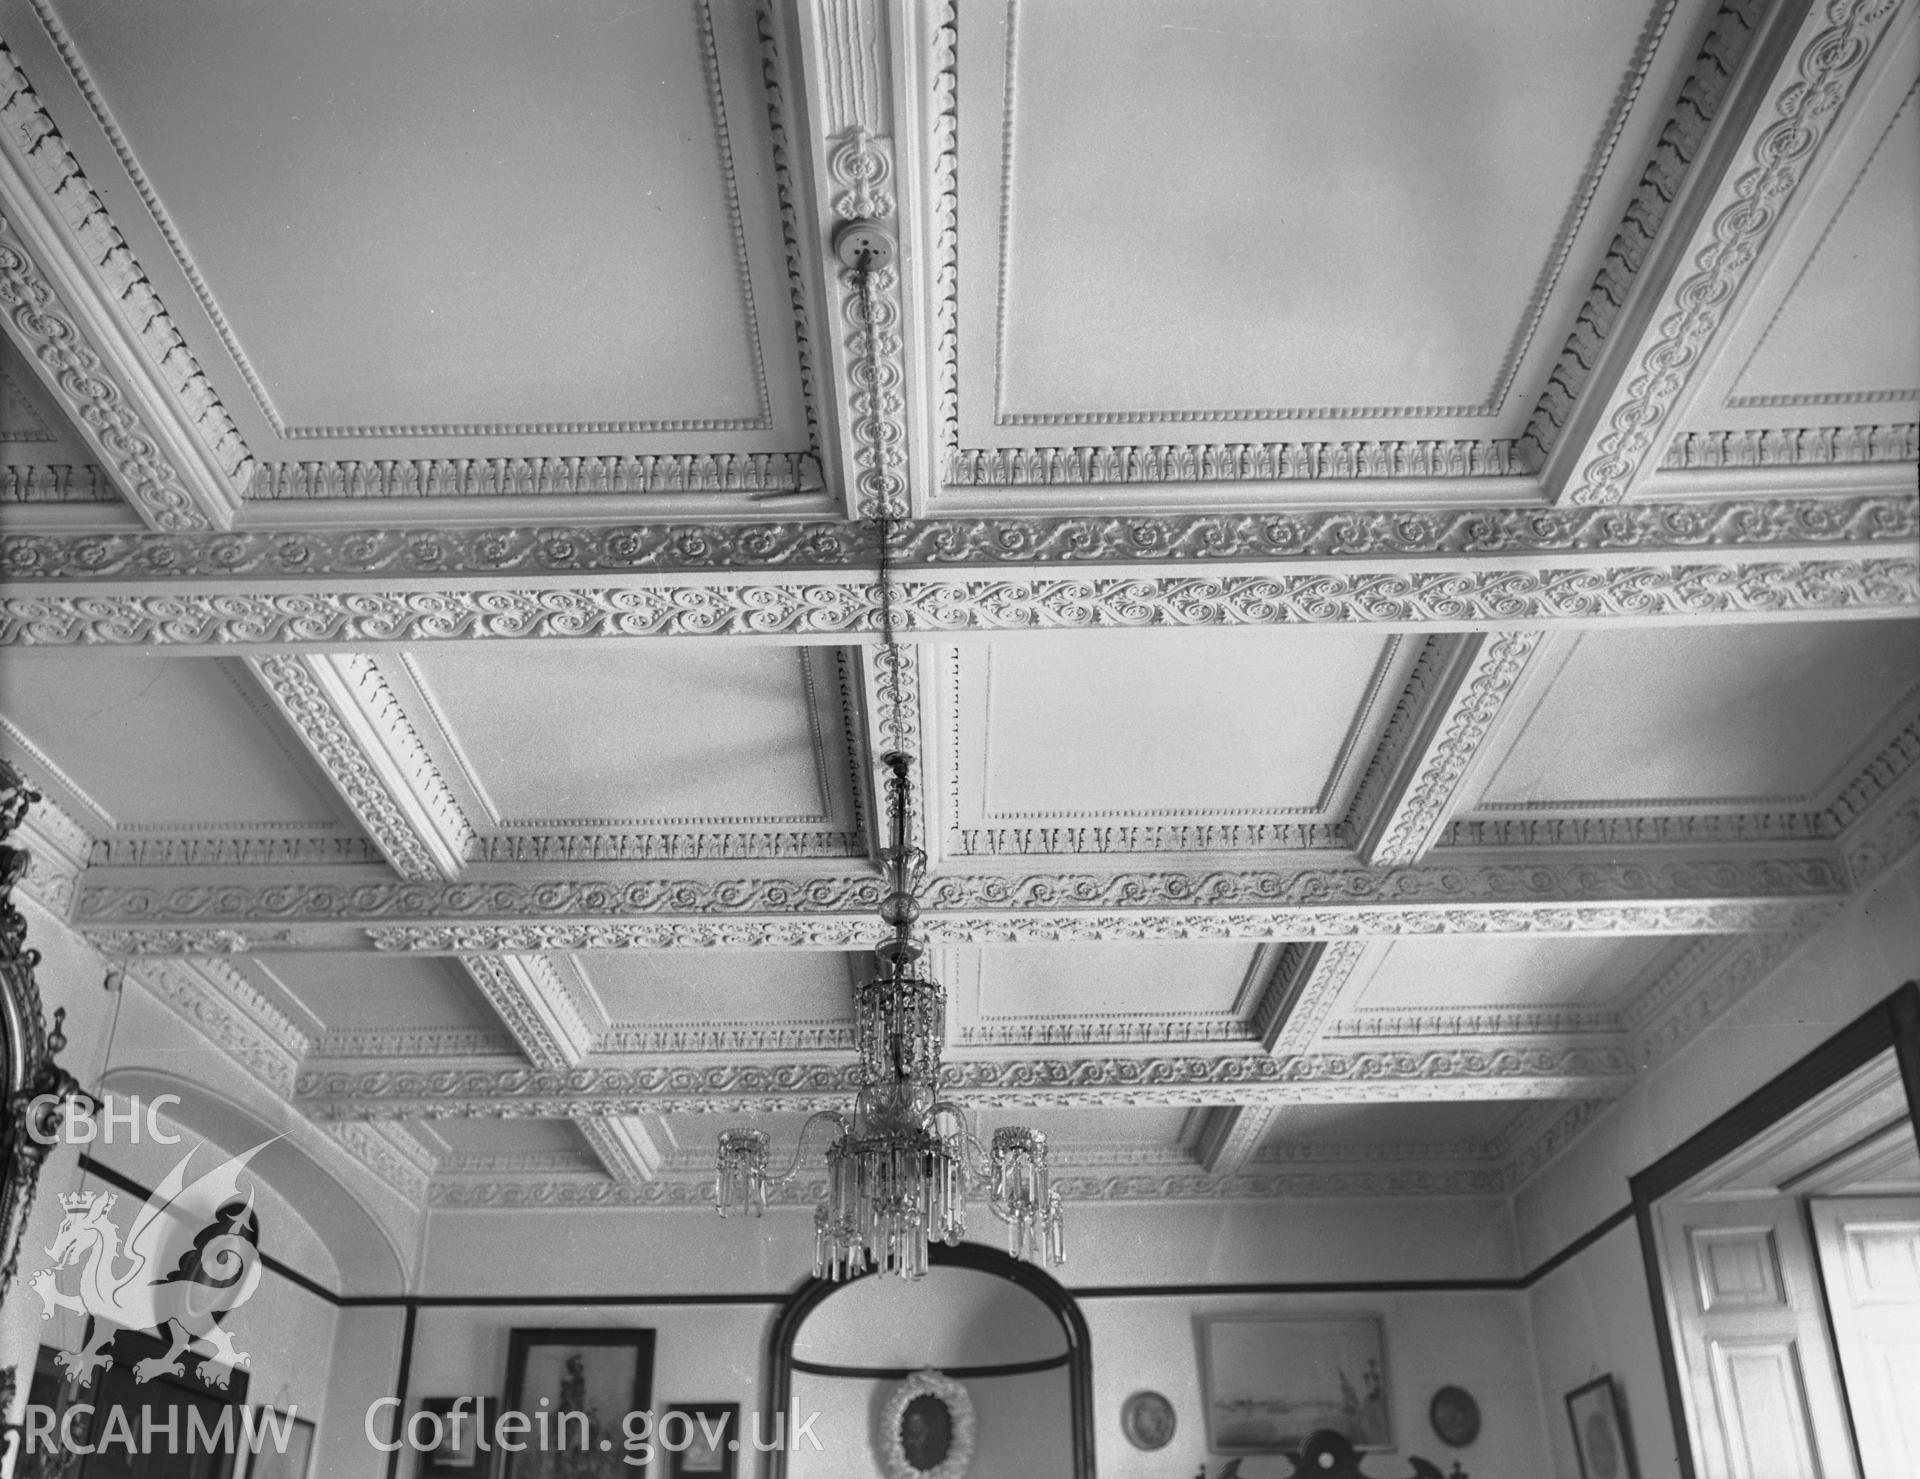 Interior view showing ceiling in drawing room